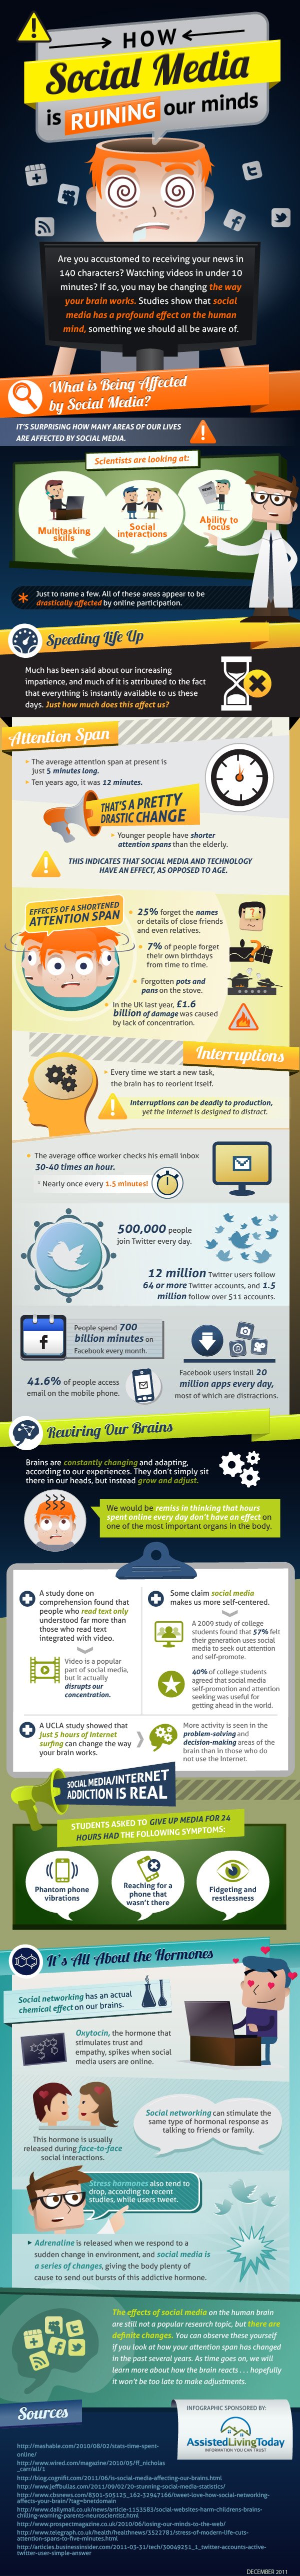 How Social Media is Ruining Our Minds Infographic